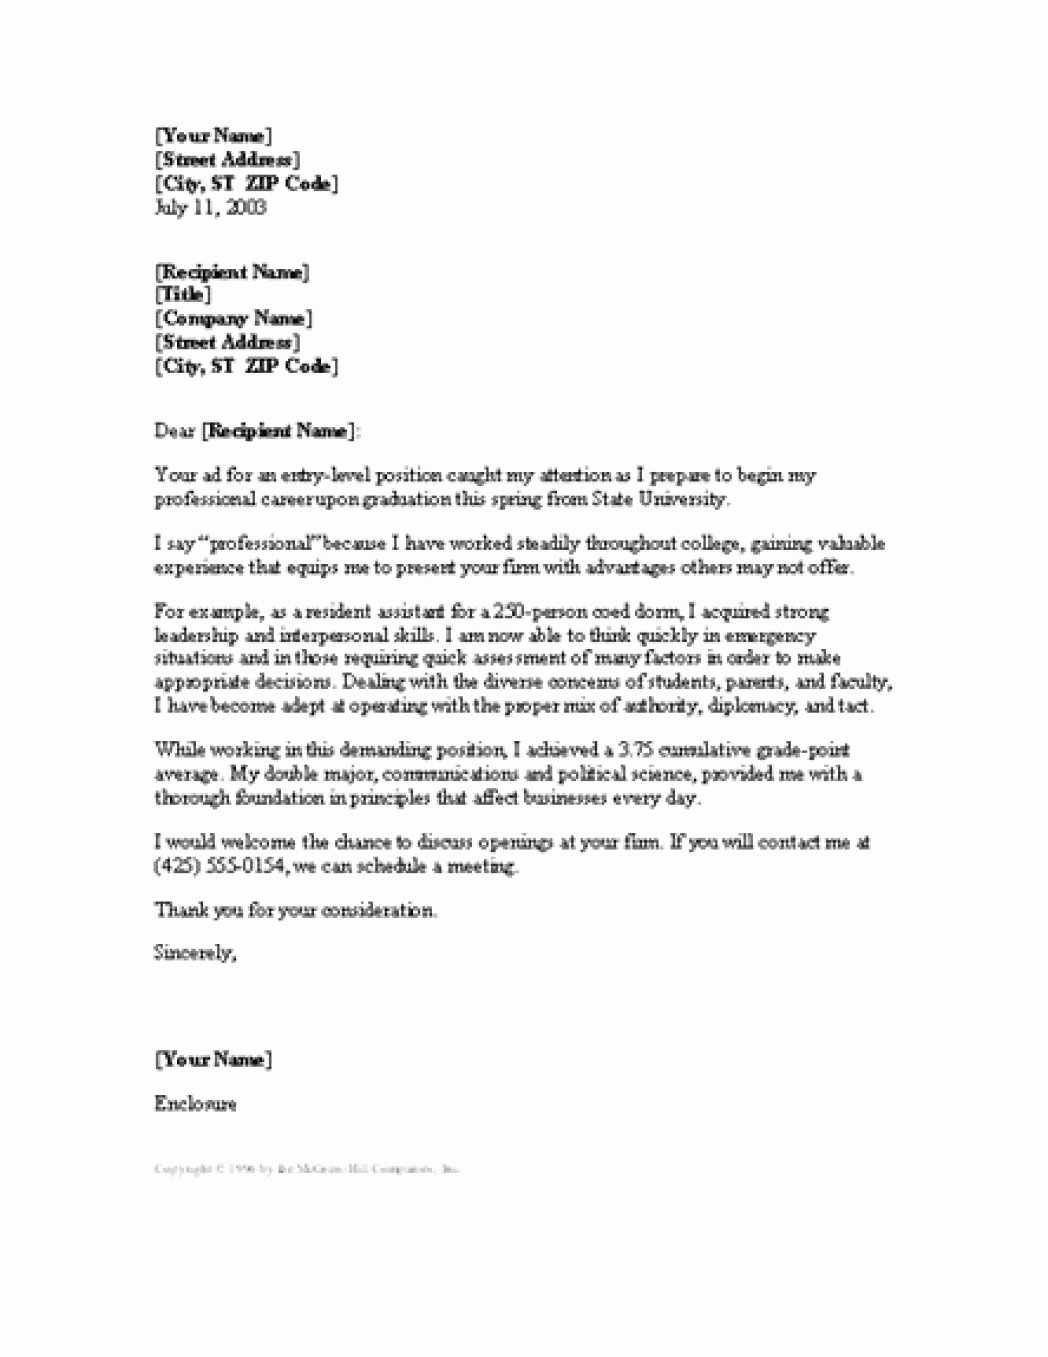 Entry Level Cover Letters Examples Lovely Cover Letter Entry Level Professional Info Position